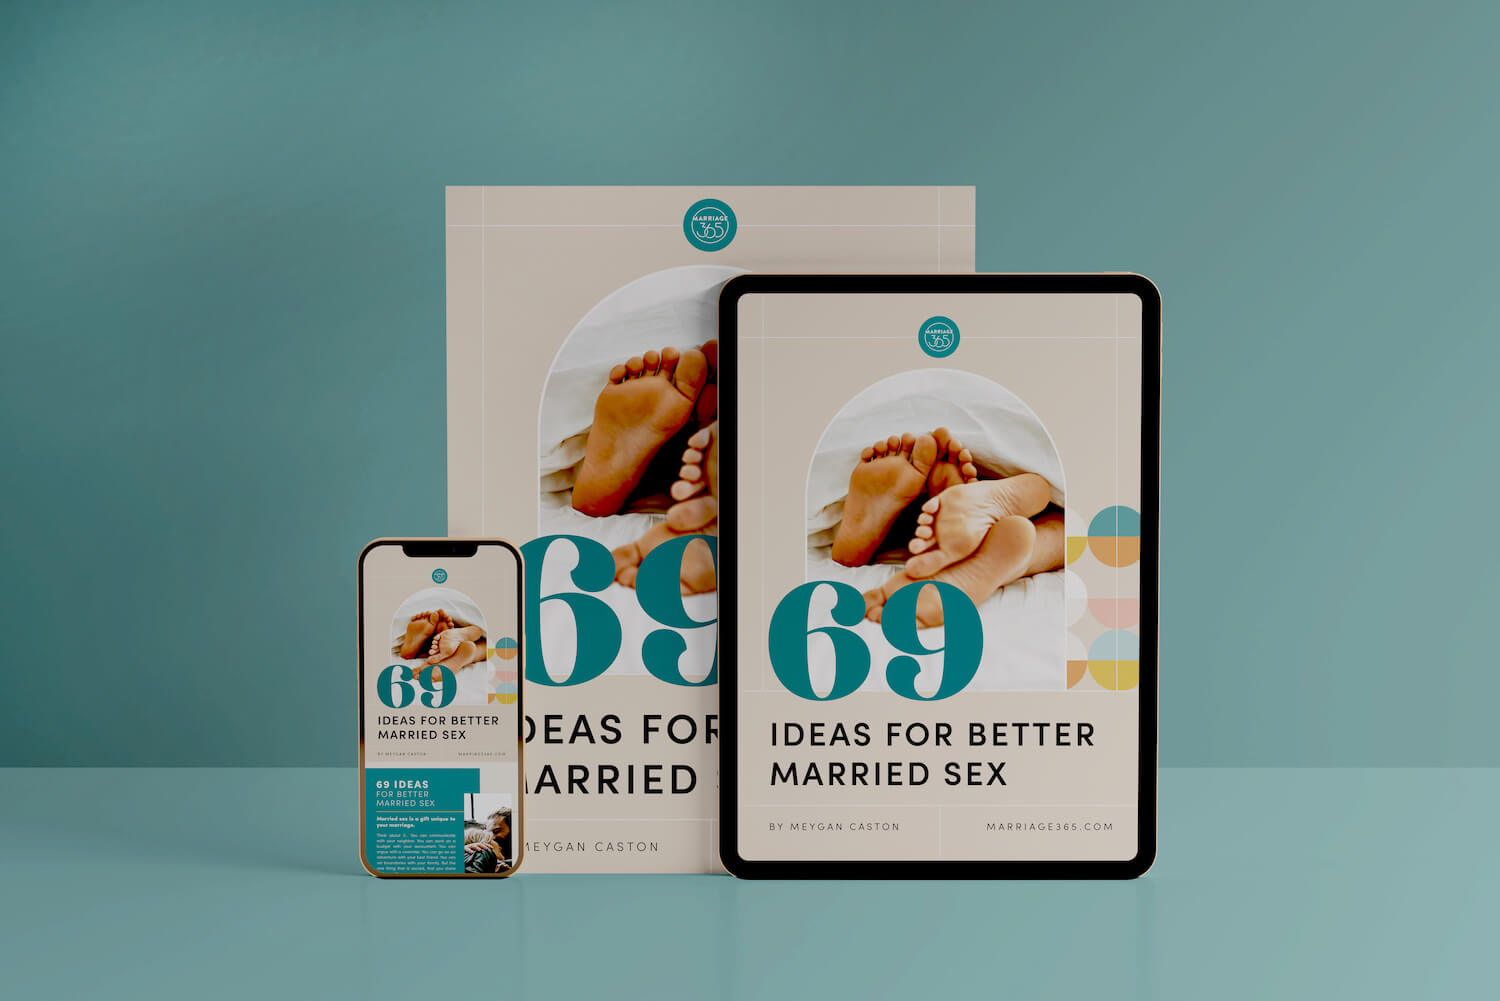 69 Ideas for Better Married Sex - Thank You - Download photo